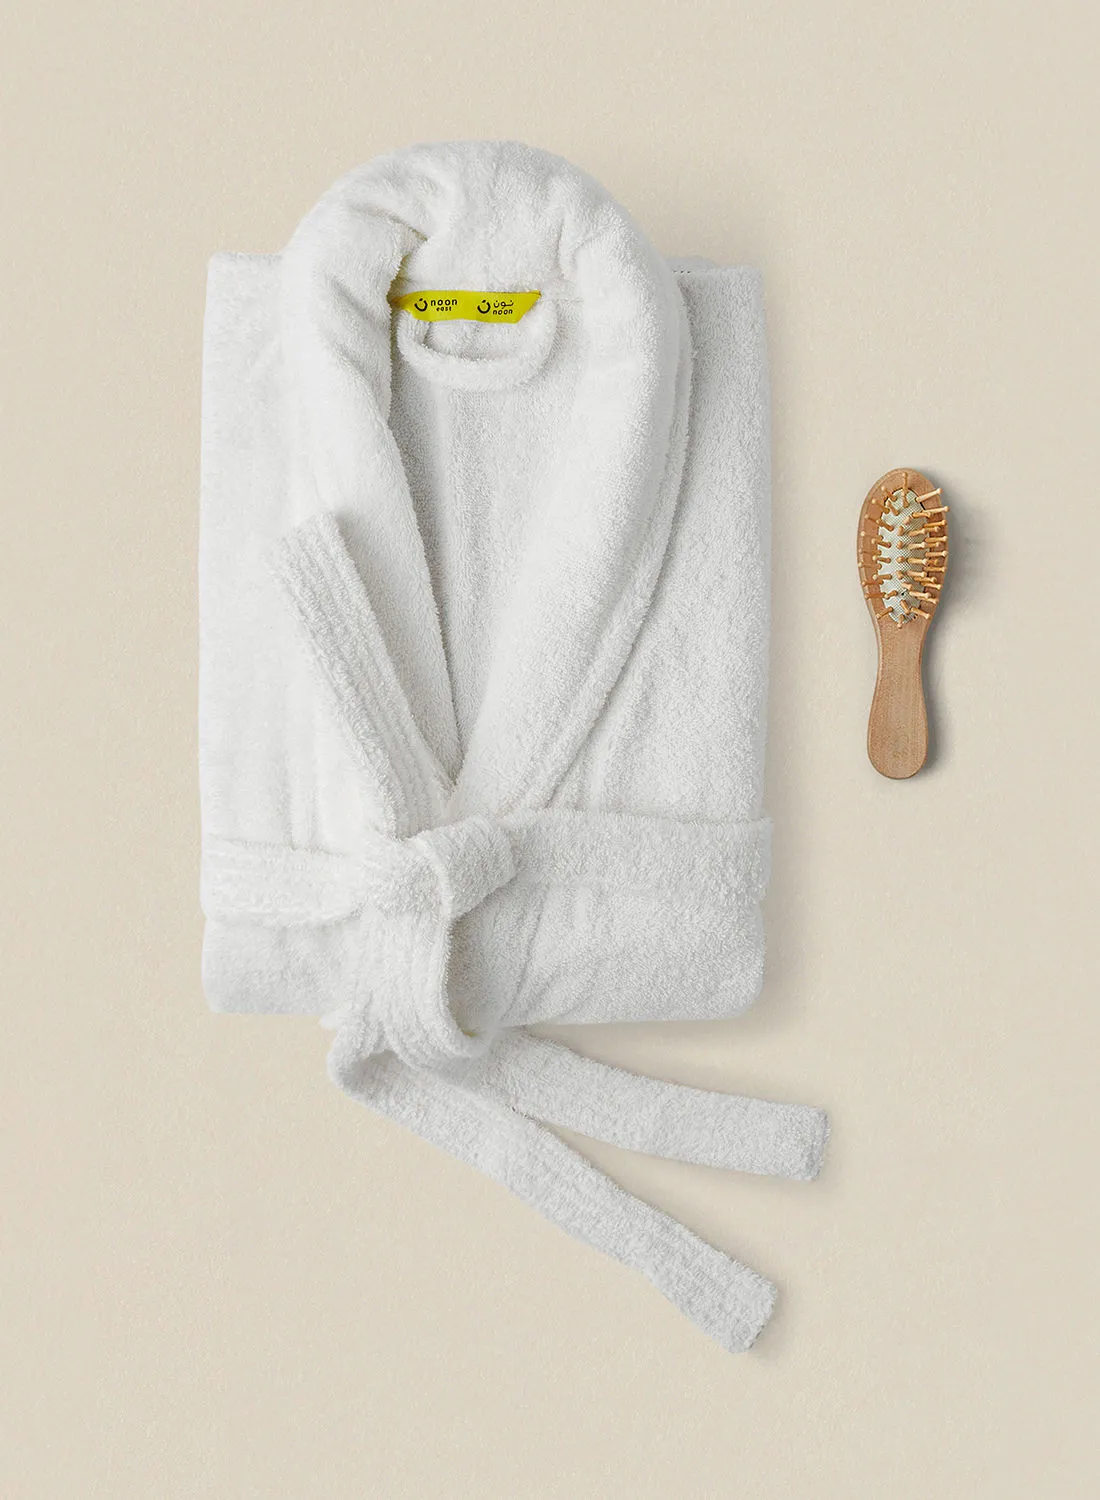 noon east Bathrobe - 400 GSM 100% Cotton Terry Silky Soft Spa Quality Comfort - Shawl Collar & Pocket - White Color - 1 Piece